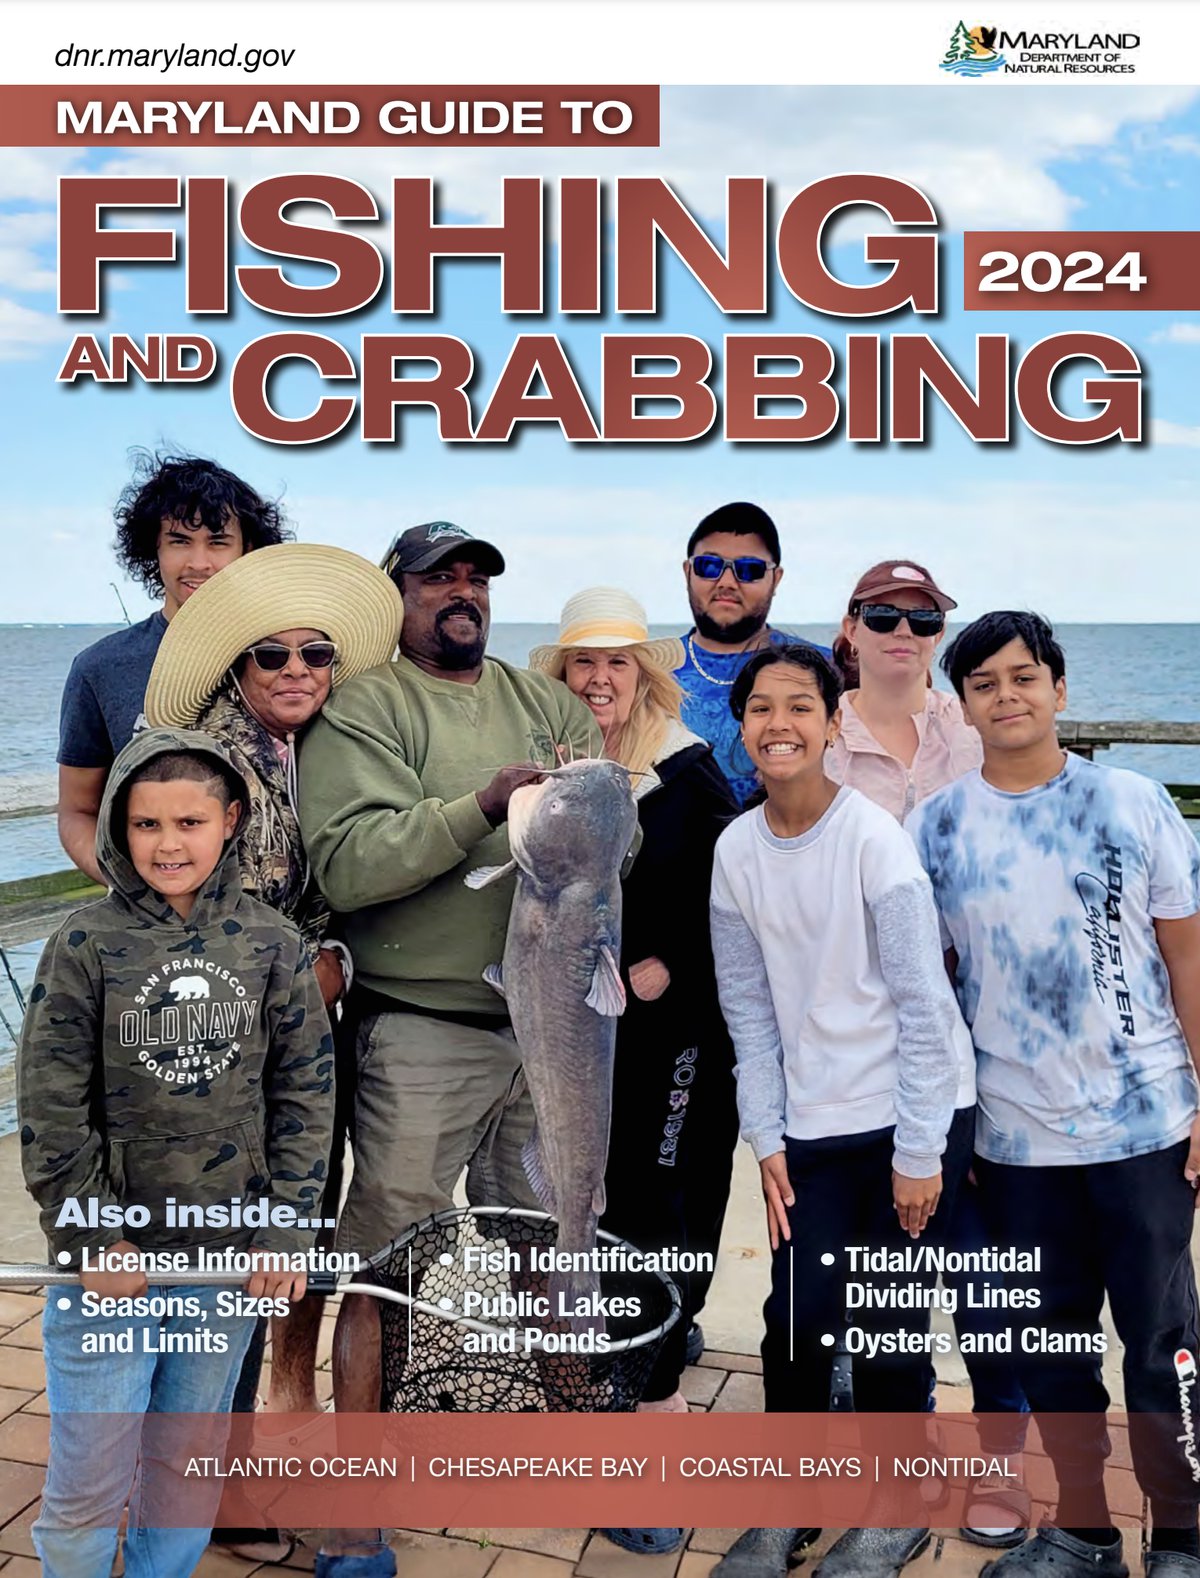 2024 Maryland Guide to Fishing and Crabbing Announced What's Up? Media